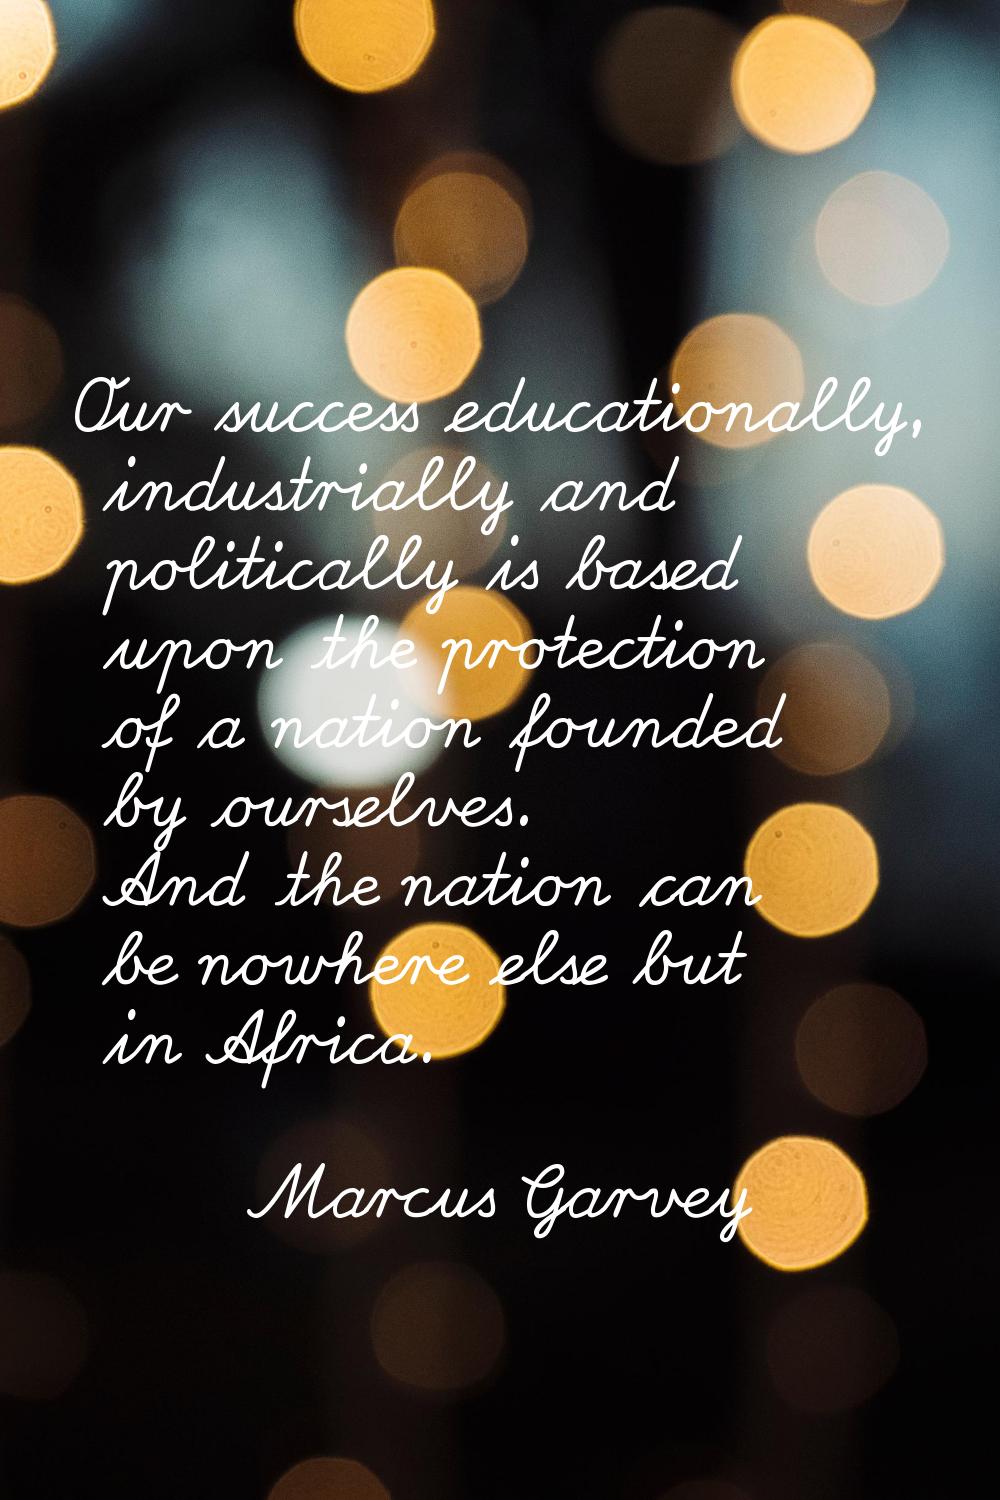 Our success educationally, industrially and politically is based upon the protection of a nation fo